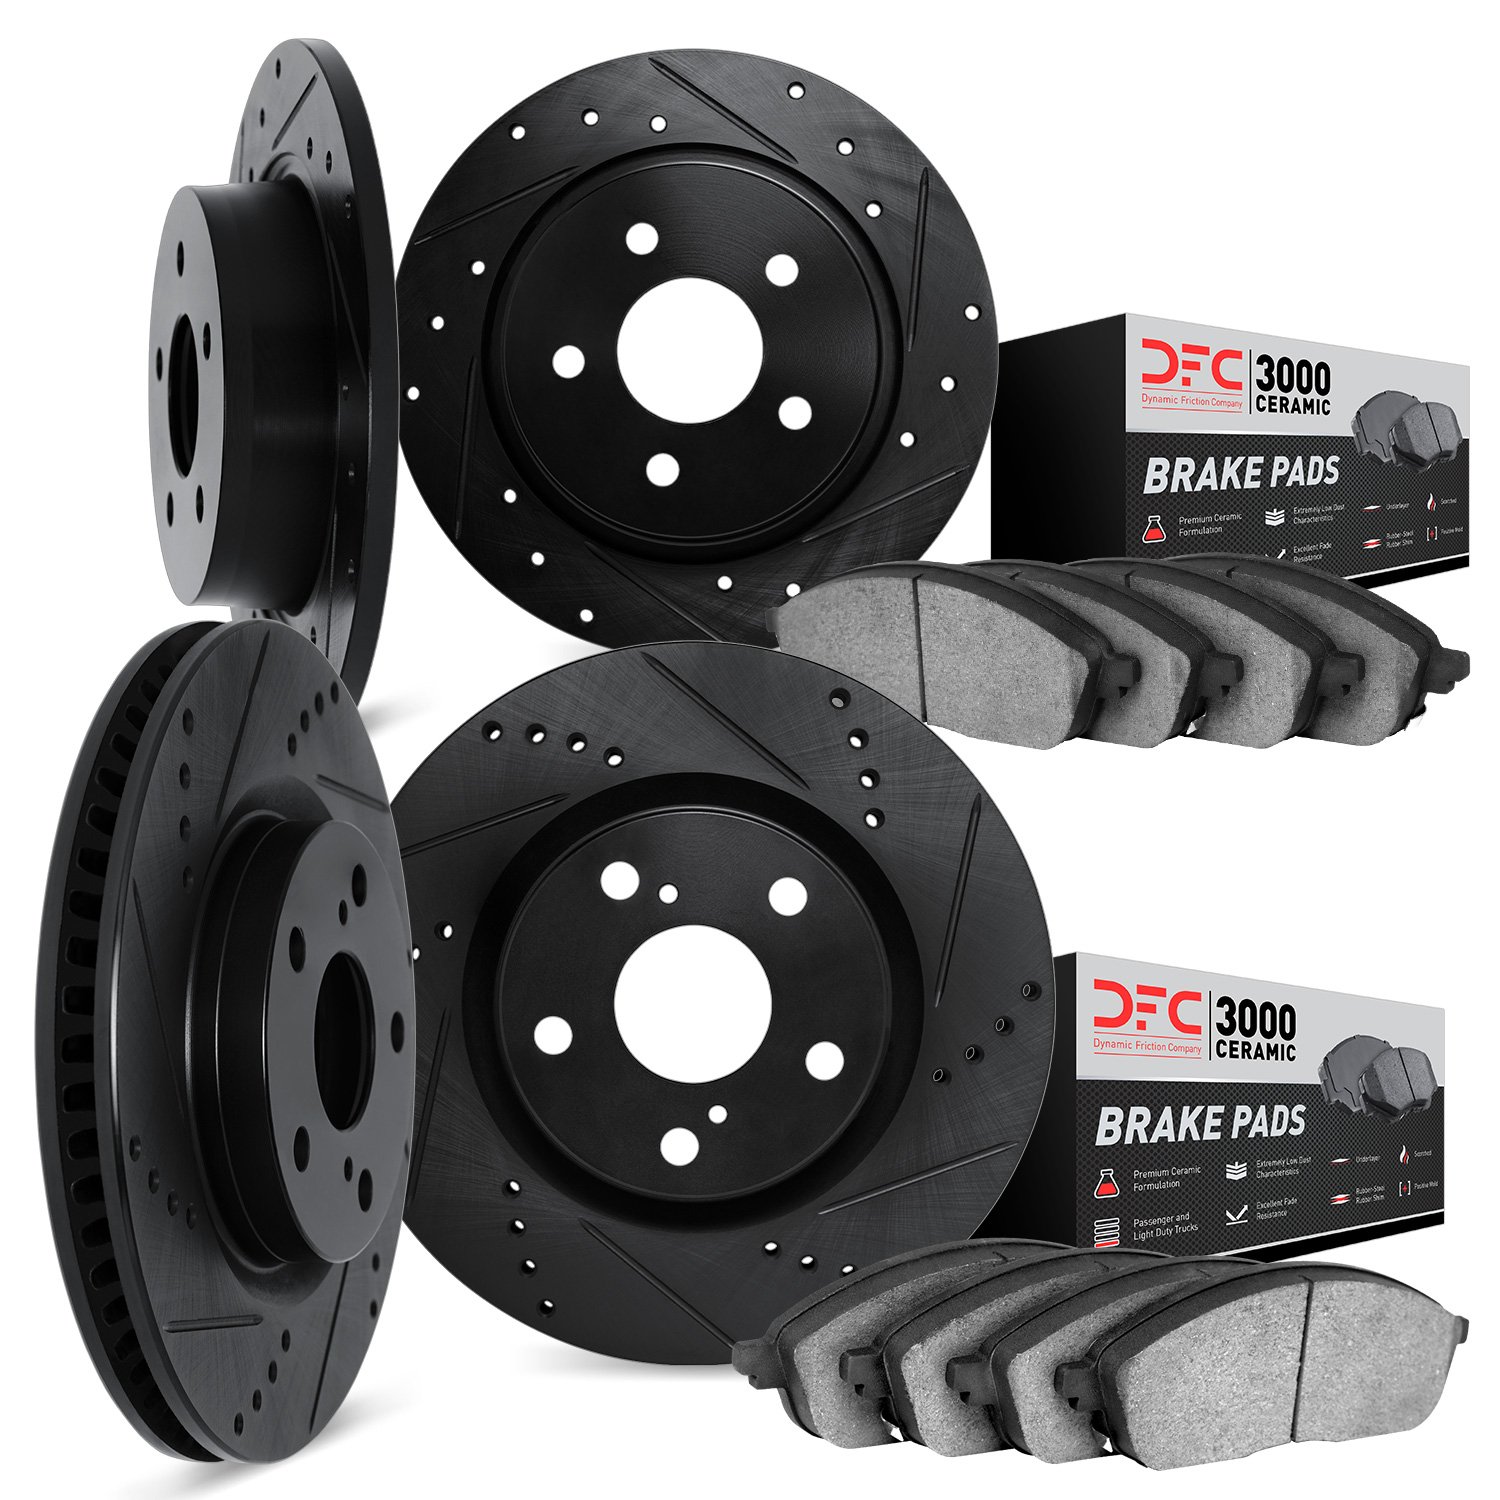 8304-40026 Drilled/Slotted Brake Rotors with 3000-Series Ceramic Brake Pads Kit [Black], 2008-2014 Mopar, Position: Front and Re